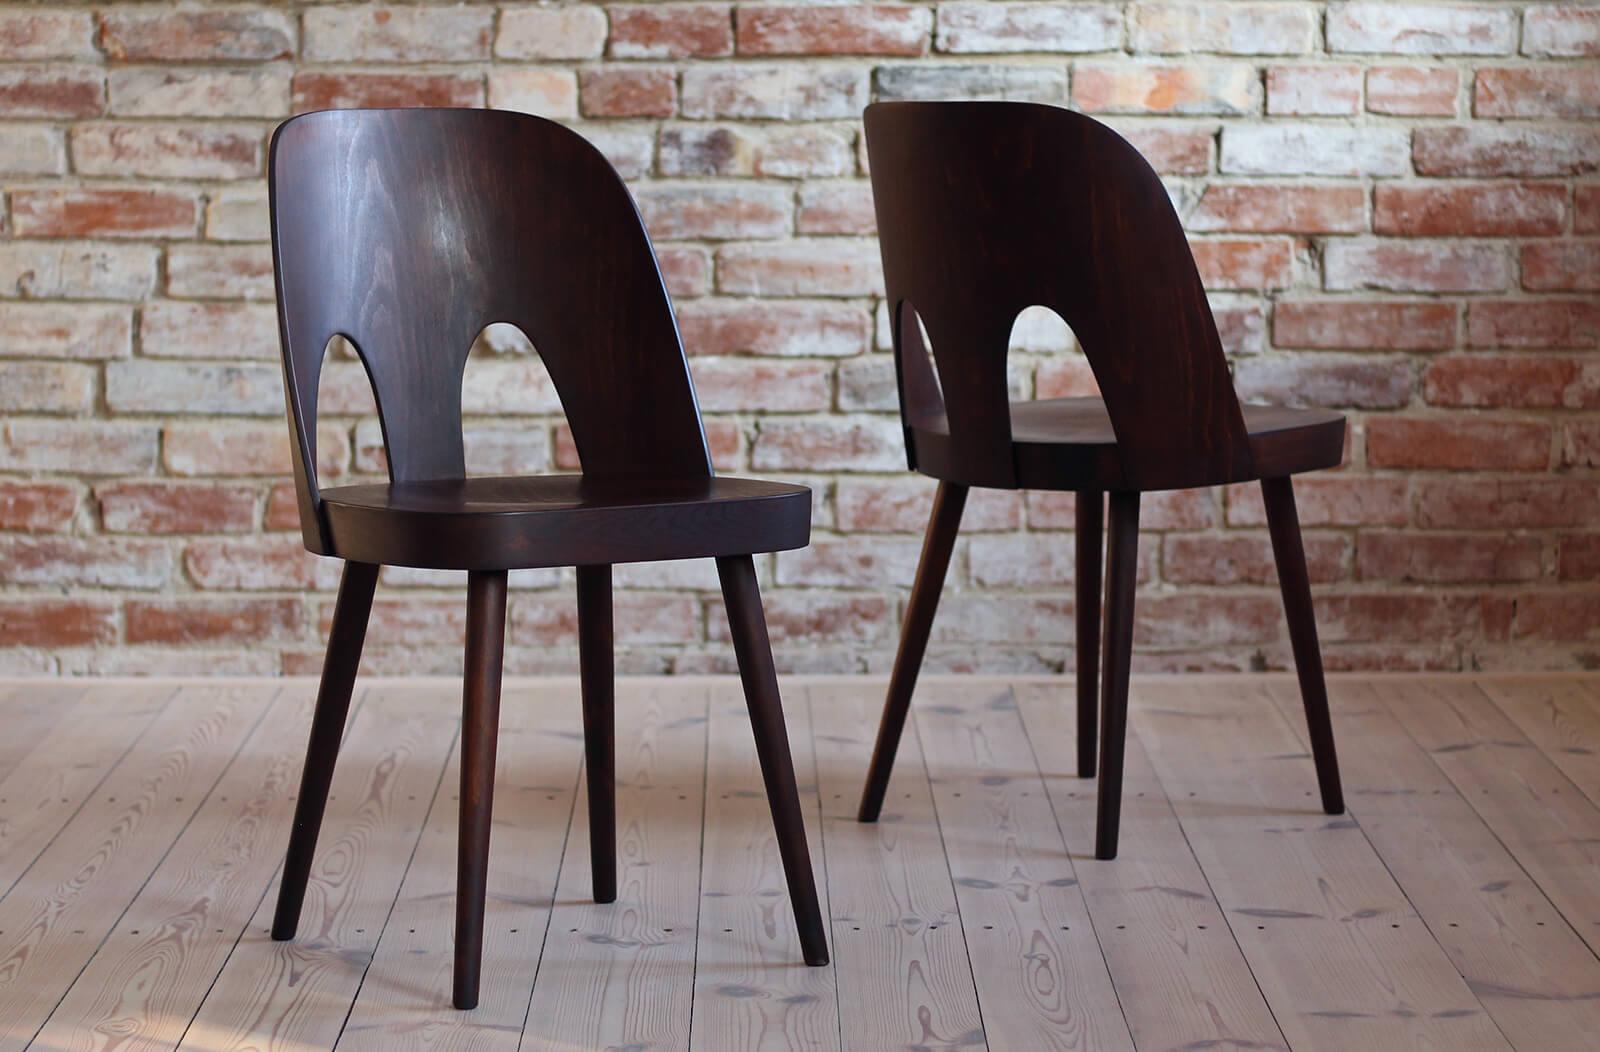 Set of 4 Dining Chairs by Oswald Haerdtl, Beech Veneer, Oil Finish, Midcentury In Good Condition For Sale In Wrocław, Poland